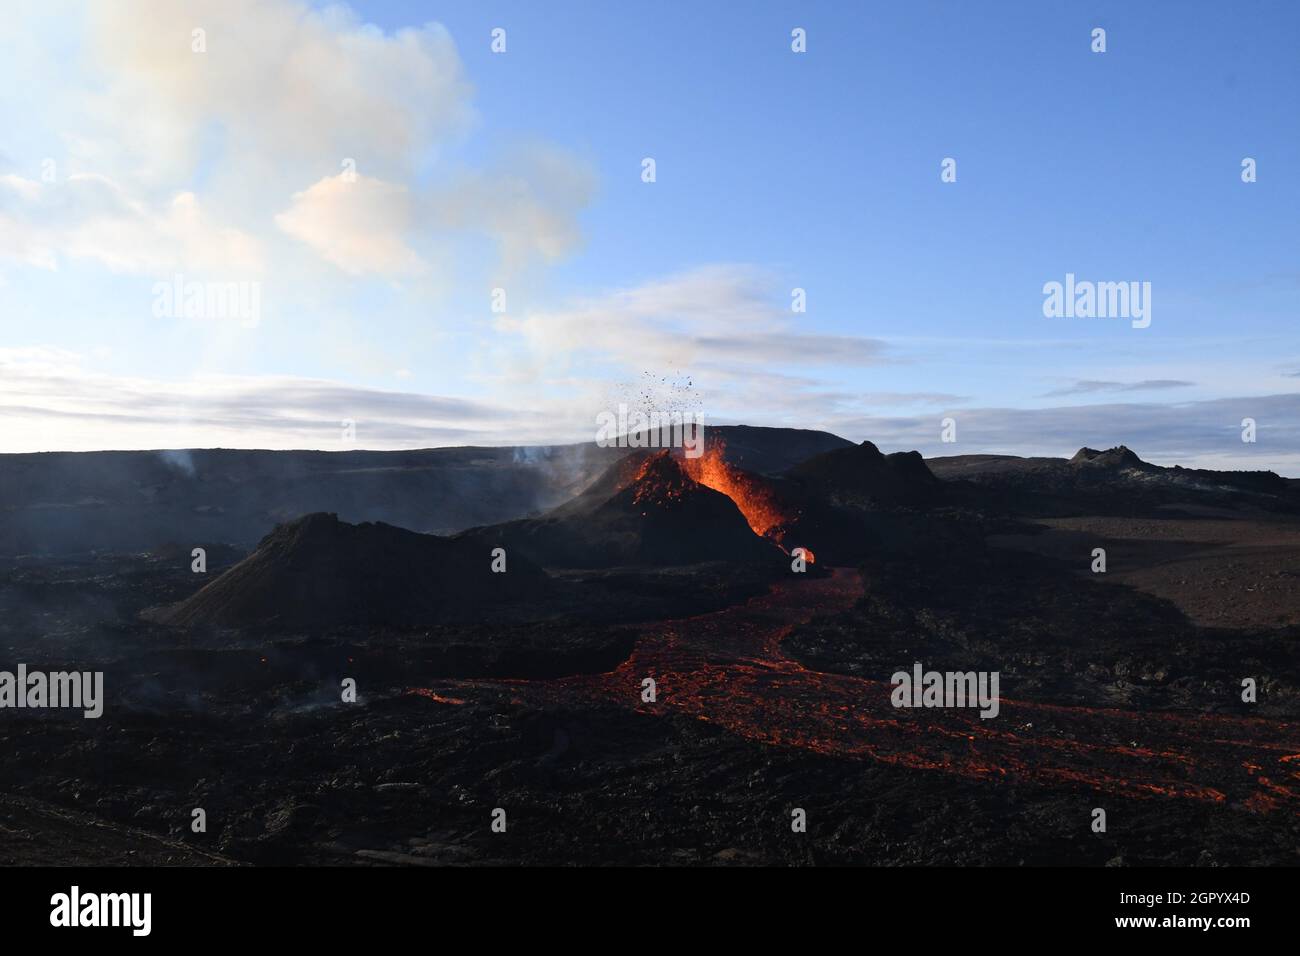 The lava field at Fagradalsfjall, Iceland. The active vent has orange molten lava erupting from it and white volcanic gas rising. Black lava field. Stock Photo